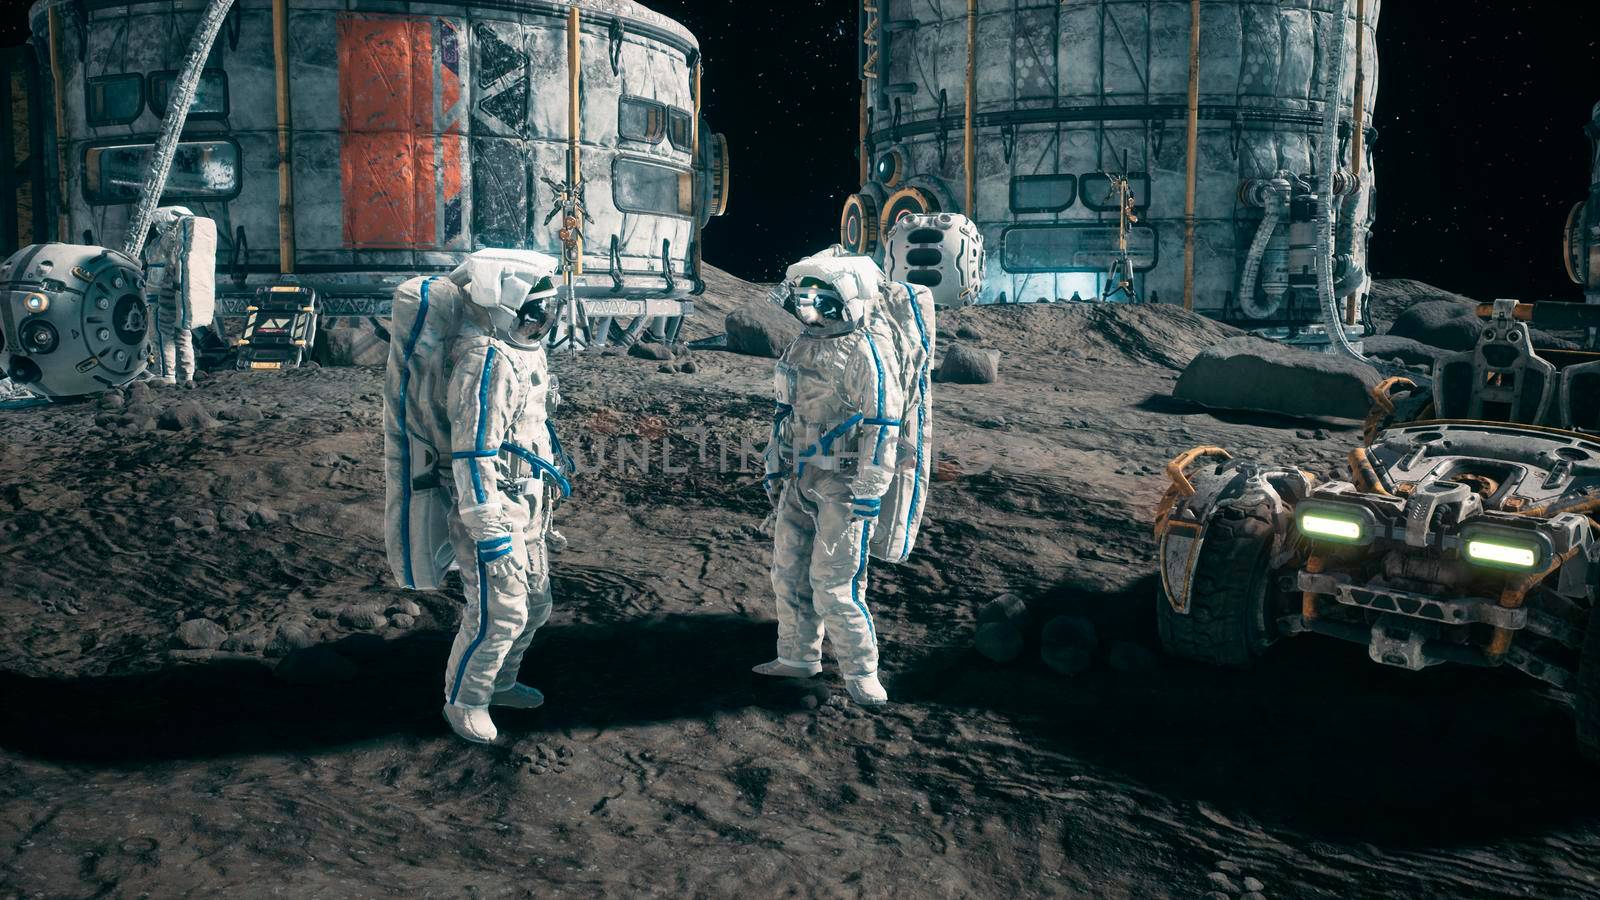 Meeting of astronauts at the lunar base near the lunar rover. View of the lunar colony and astronauts working at the space base. 3D Rendering. by designprojects